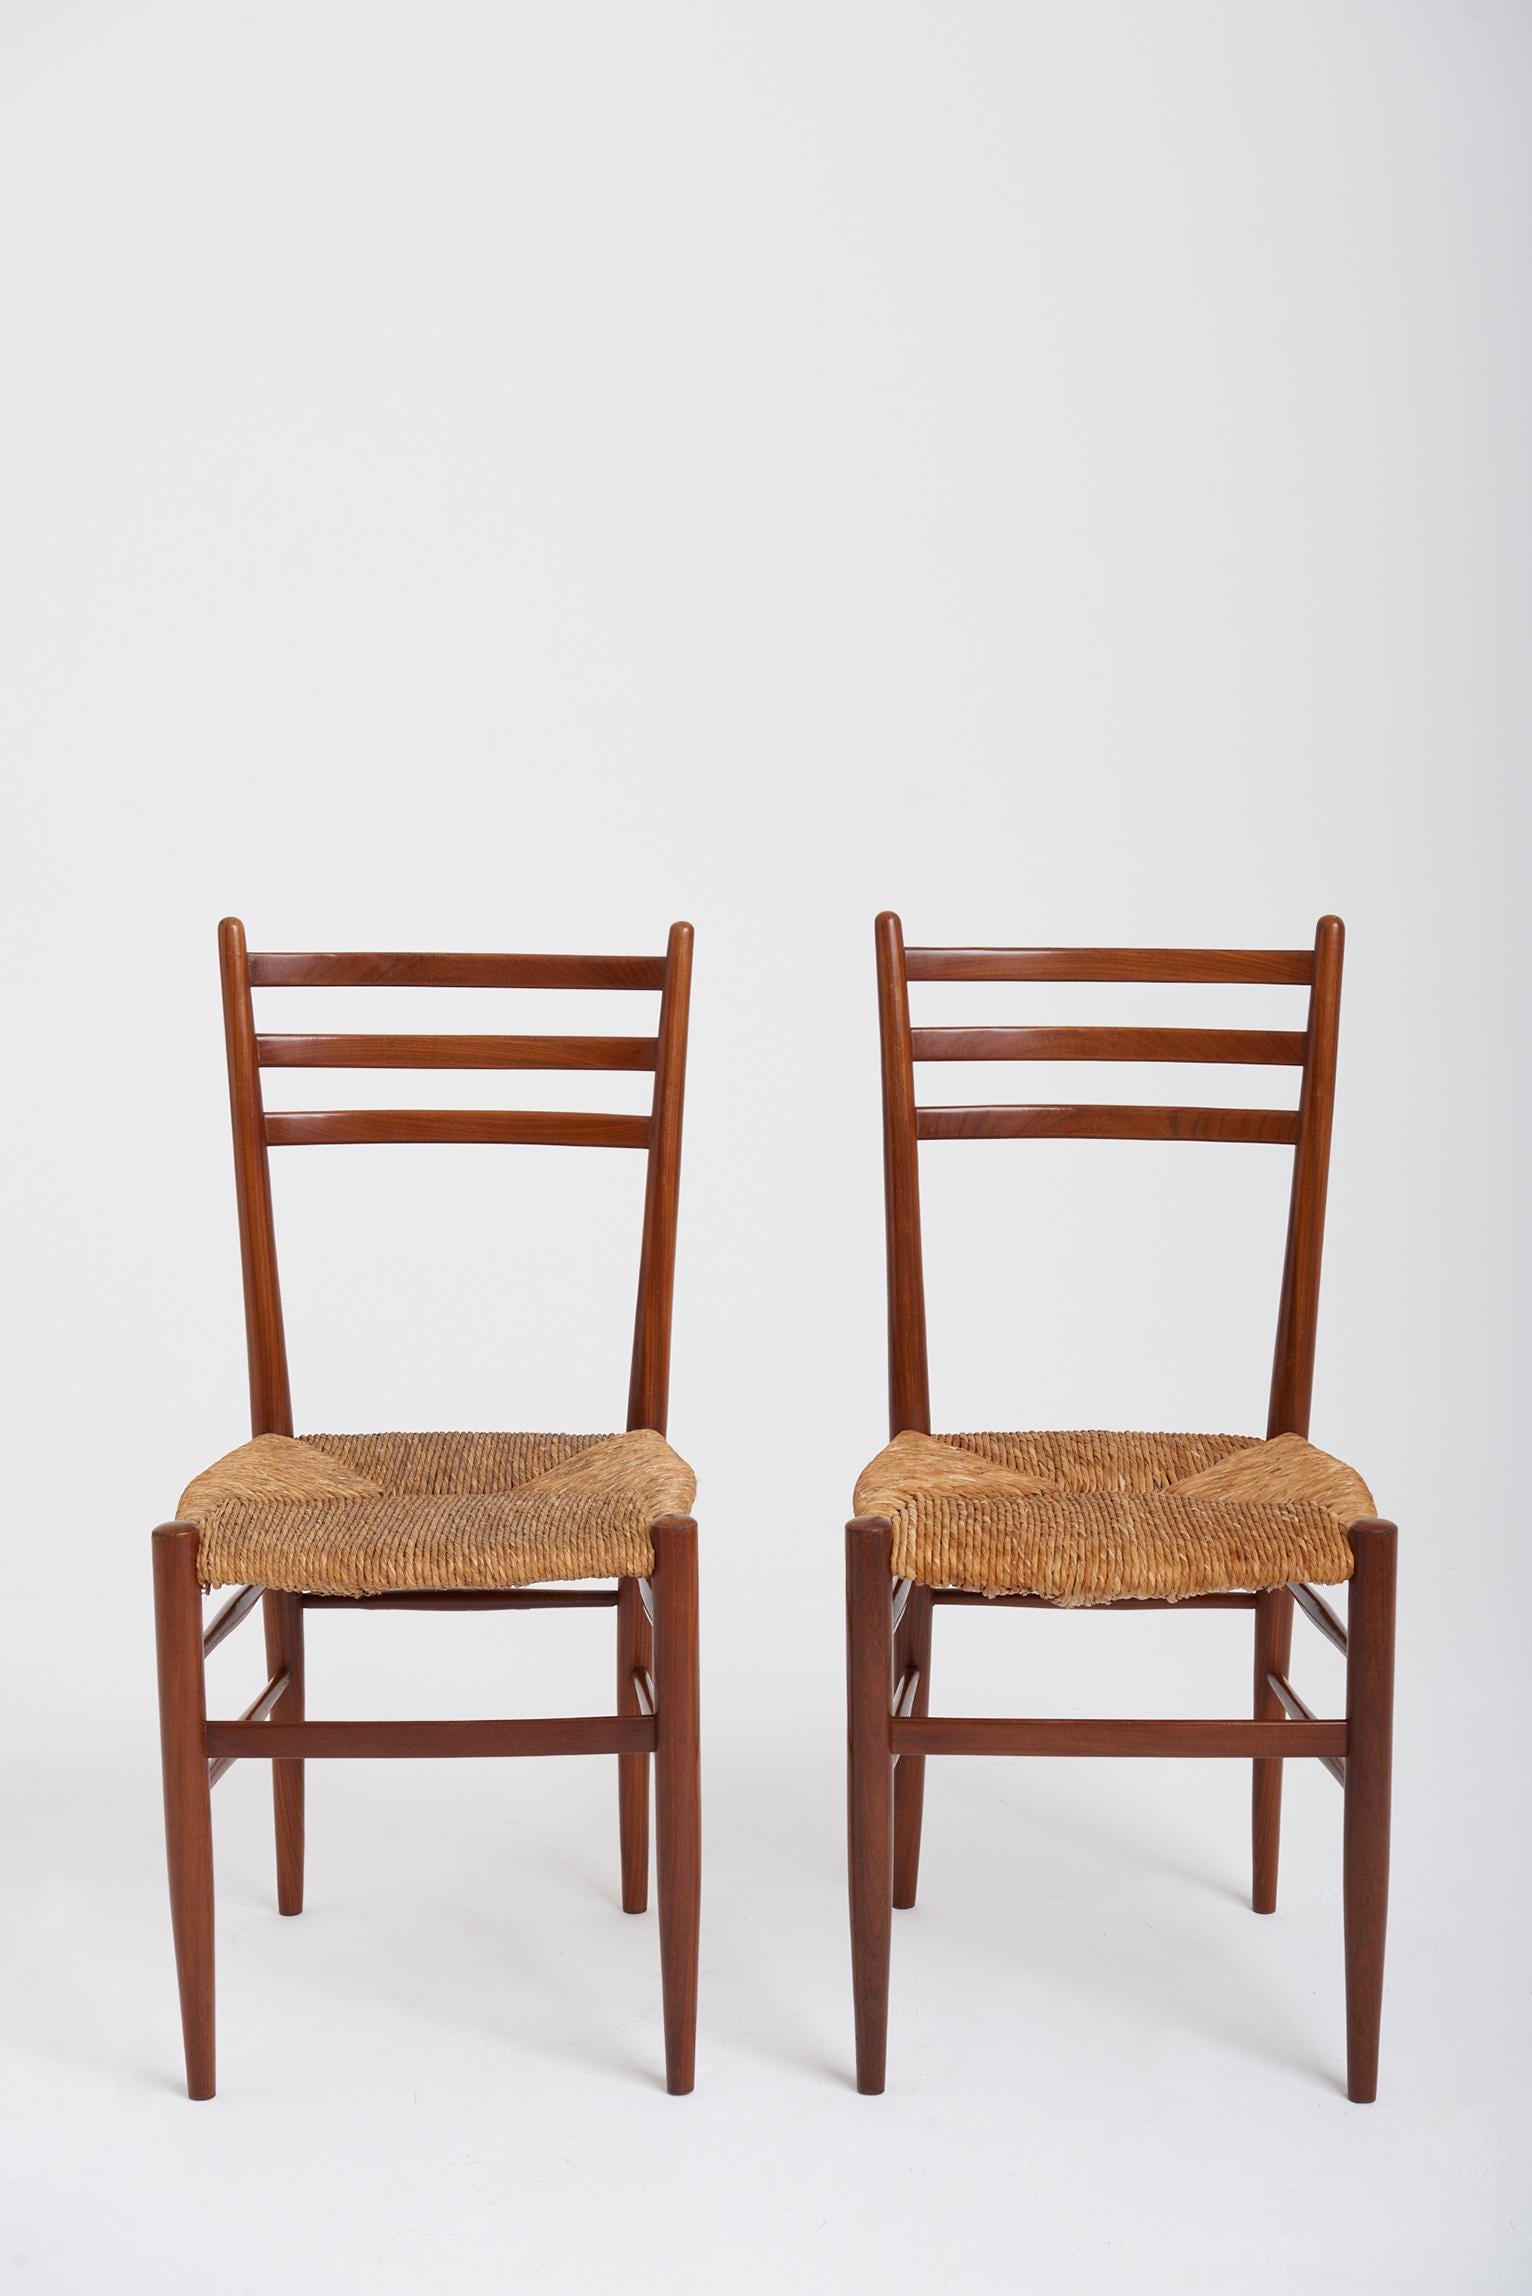 A pair of midcentury teak and rush seat ladder back chairs designed by Otto Gerdau.
Retailed by Rooksmoor Mills, in their Knightsbridge showroom in London (Beauchamp Place).
Bearing the original retailer's label.
Italy, third quarter of the 20th